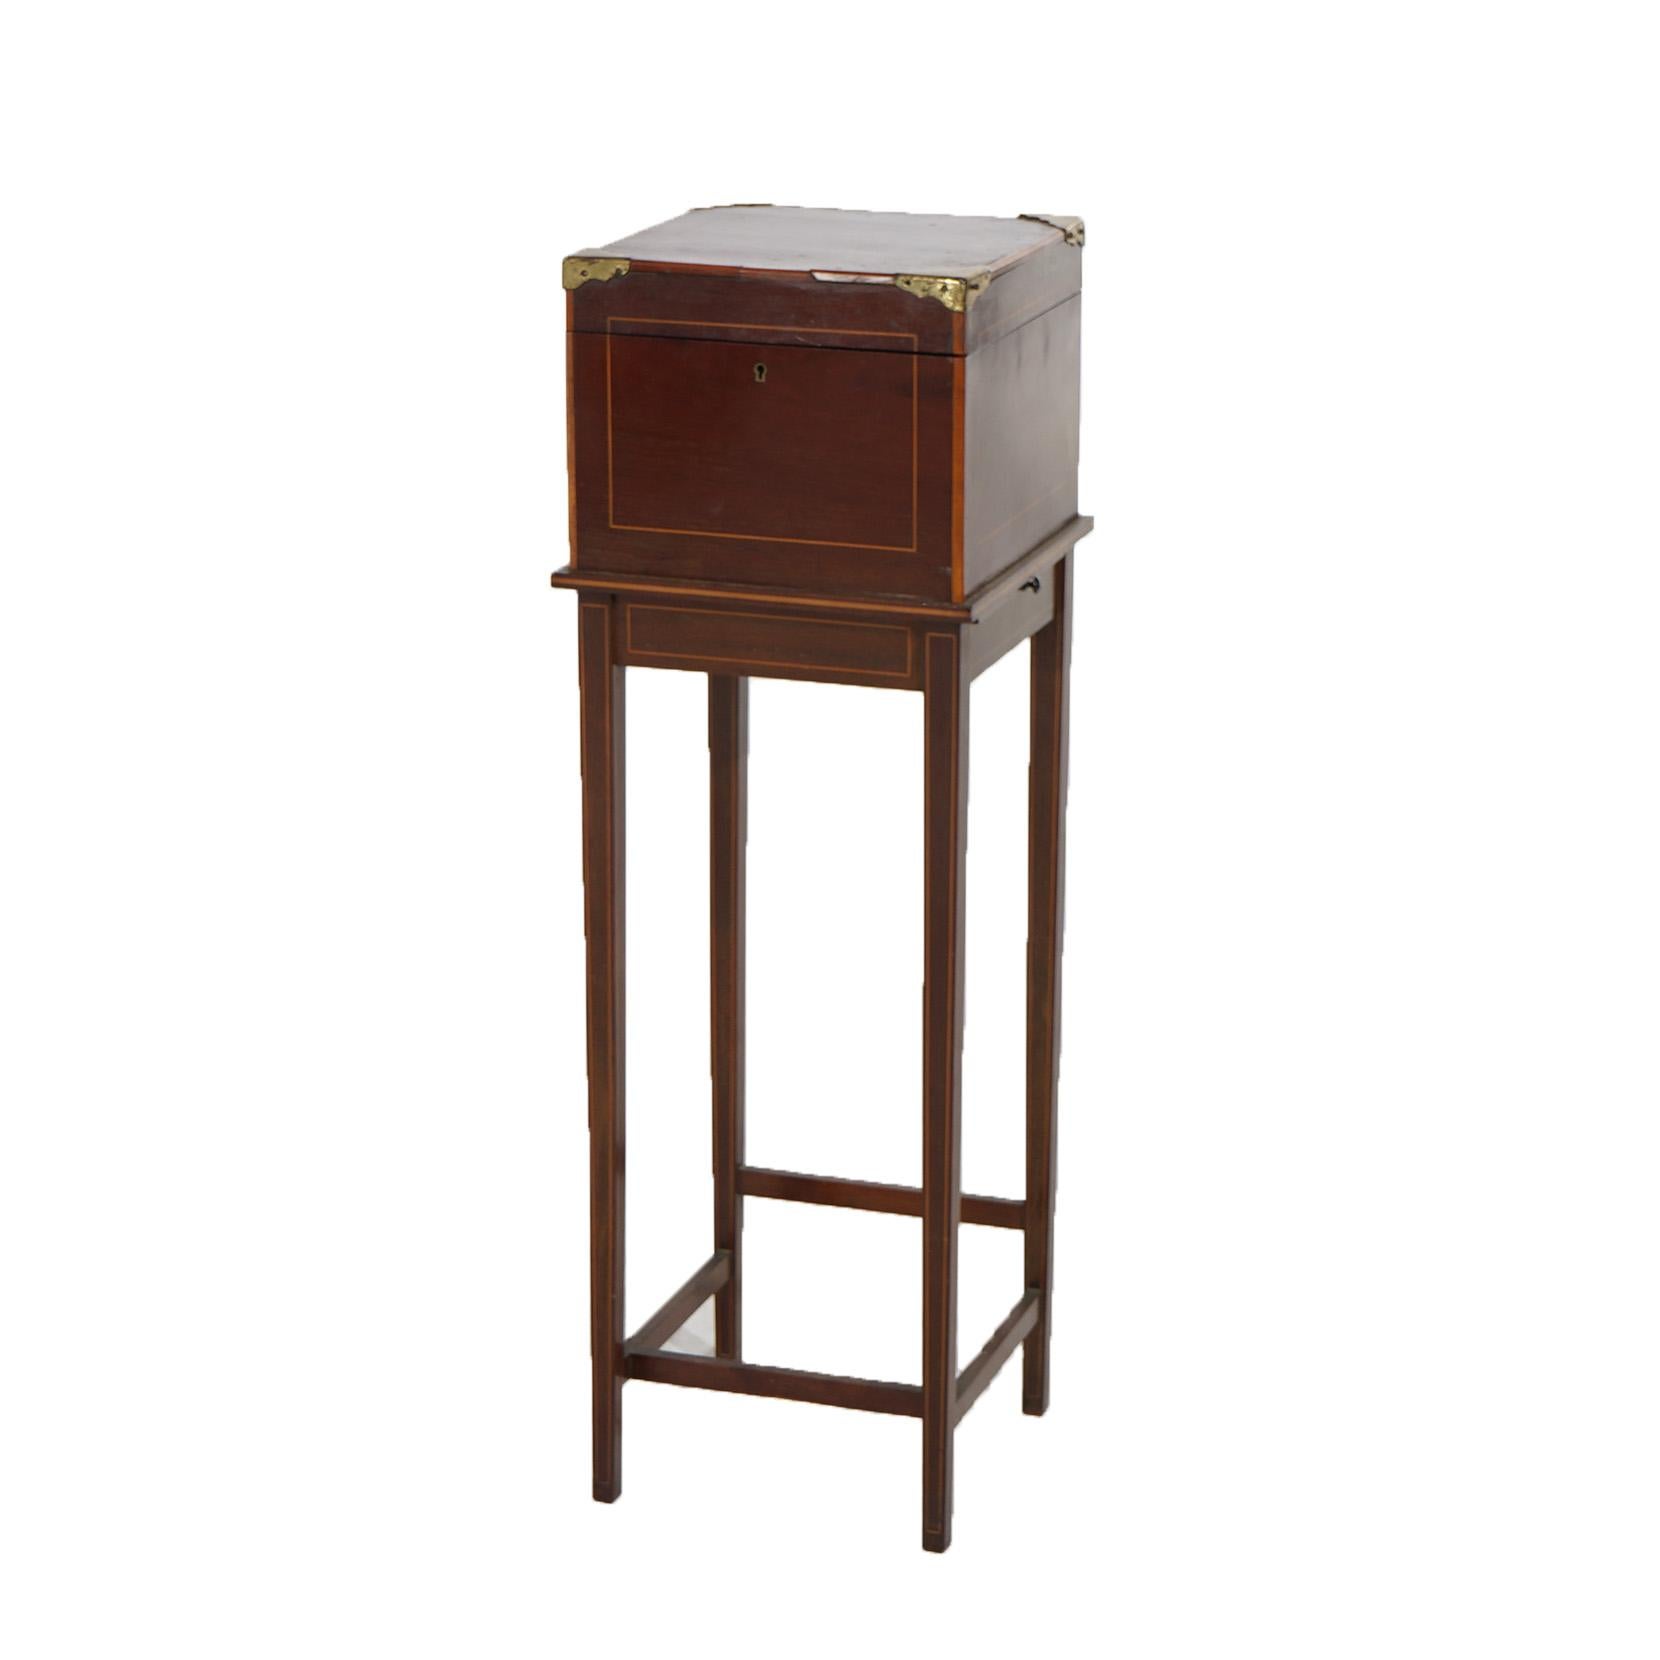 ***Ask About Discounted In-House Shipping***
An antique English Hepplewhite sewing stand offers satinwood banded mahogany construction with lift-top and drop-front opening to reveal two drawers, raised on straight and tapered legs, brass caps